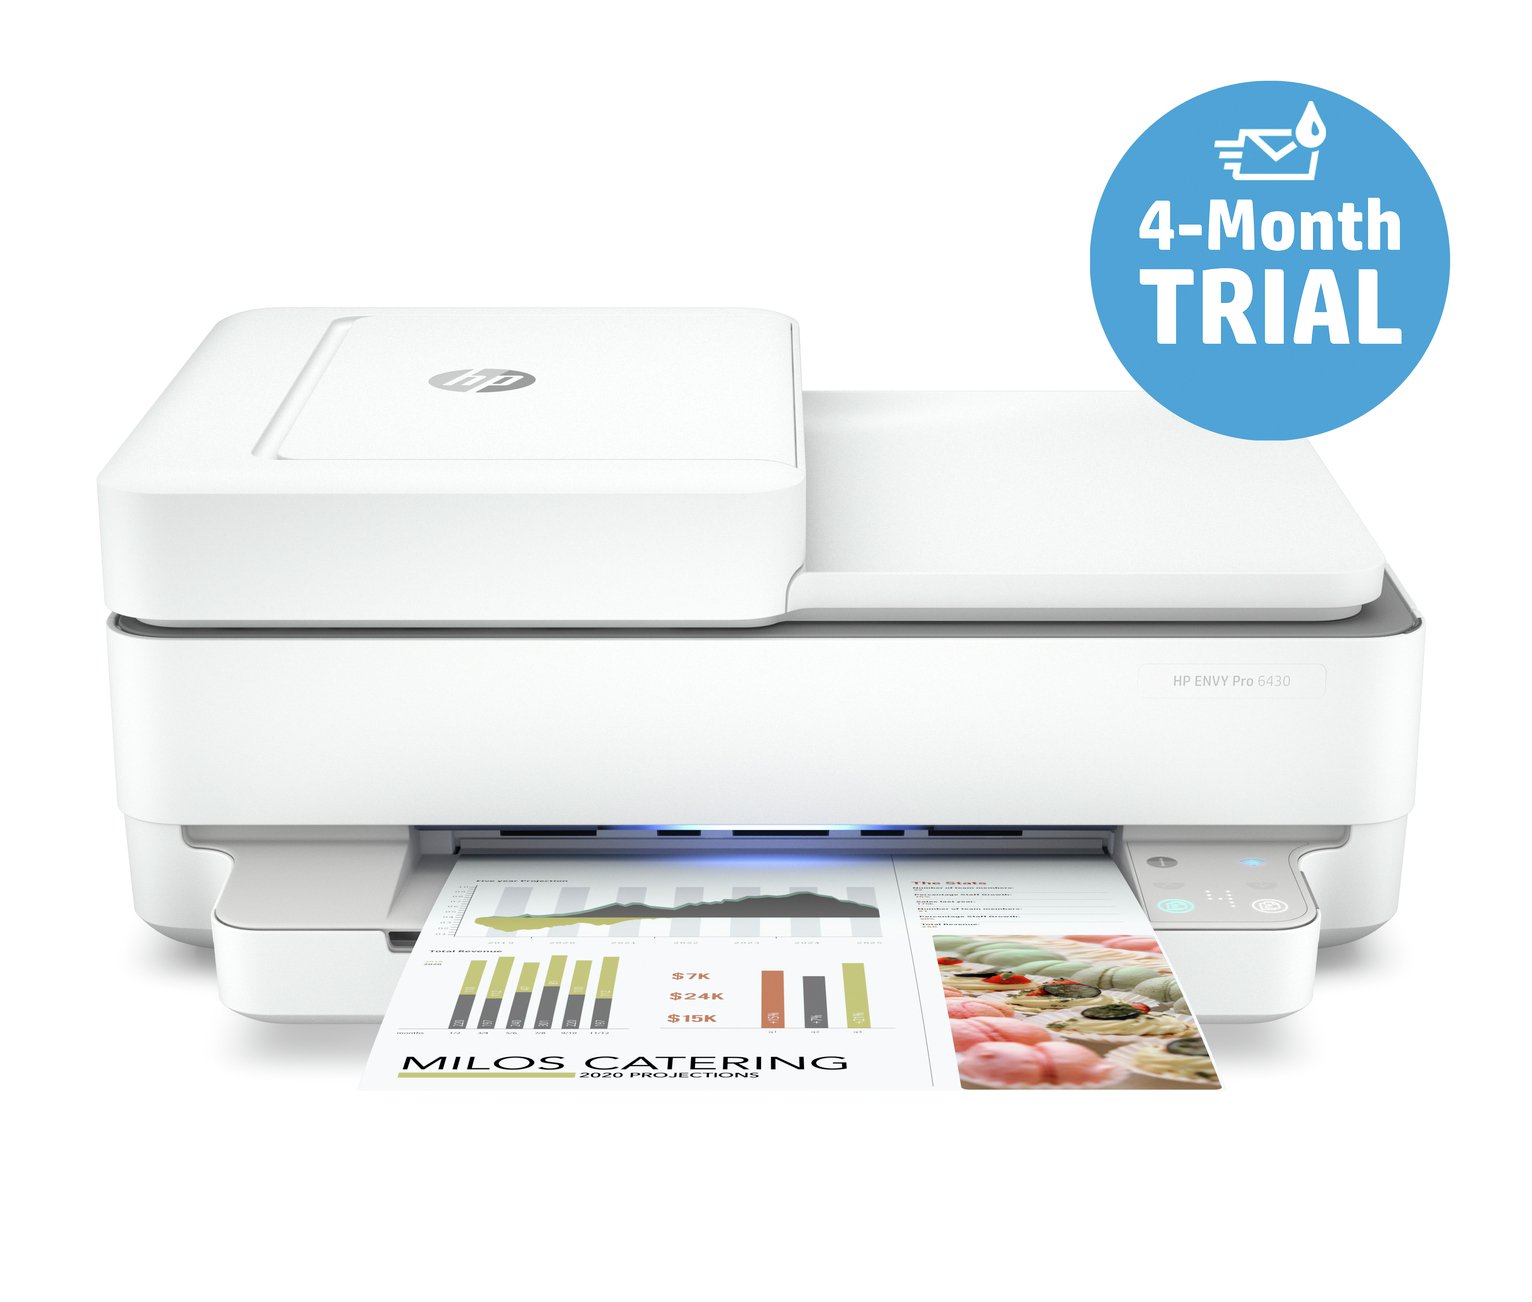 HP Envy 6430 Wireless Printer & 4 Months Instant Ink Review